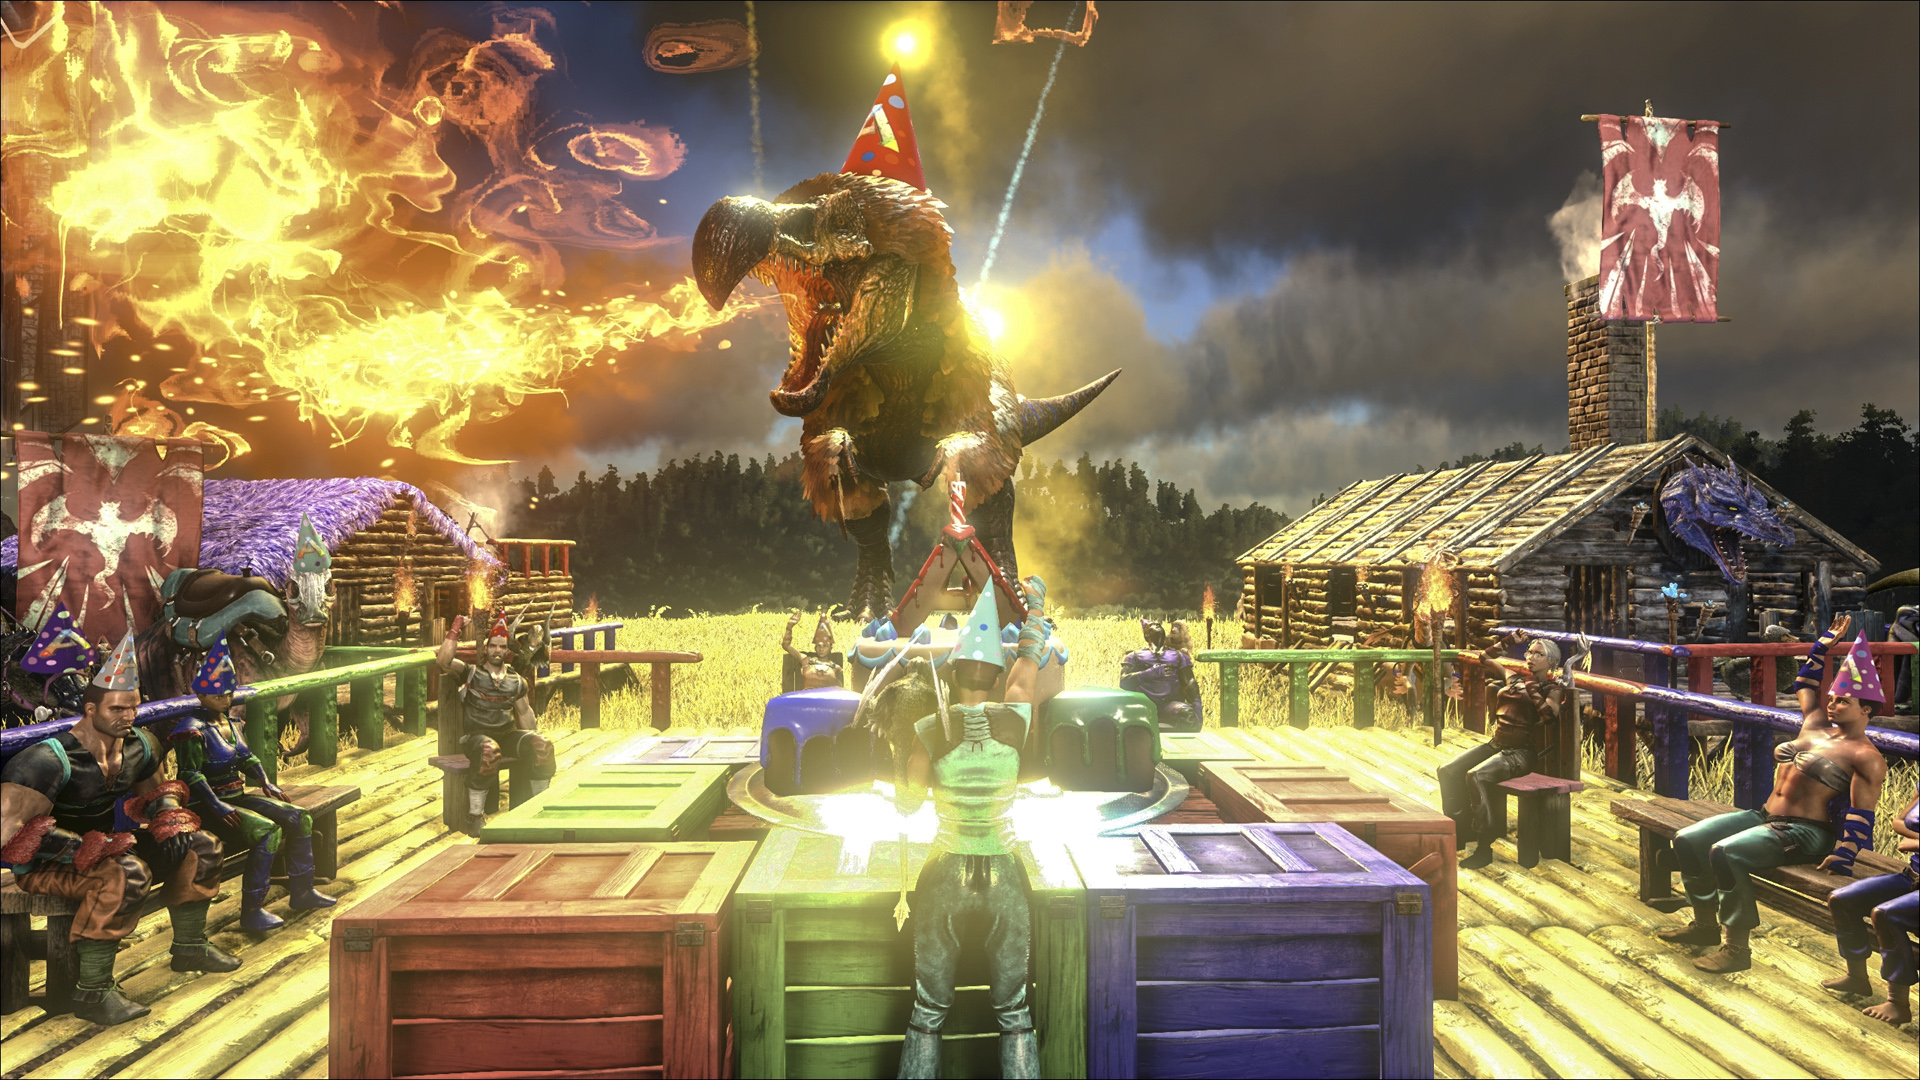 ARK: Survival Evolved Offers New Dino Colors In Its Love Evolved  Valentine's EVO Event 